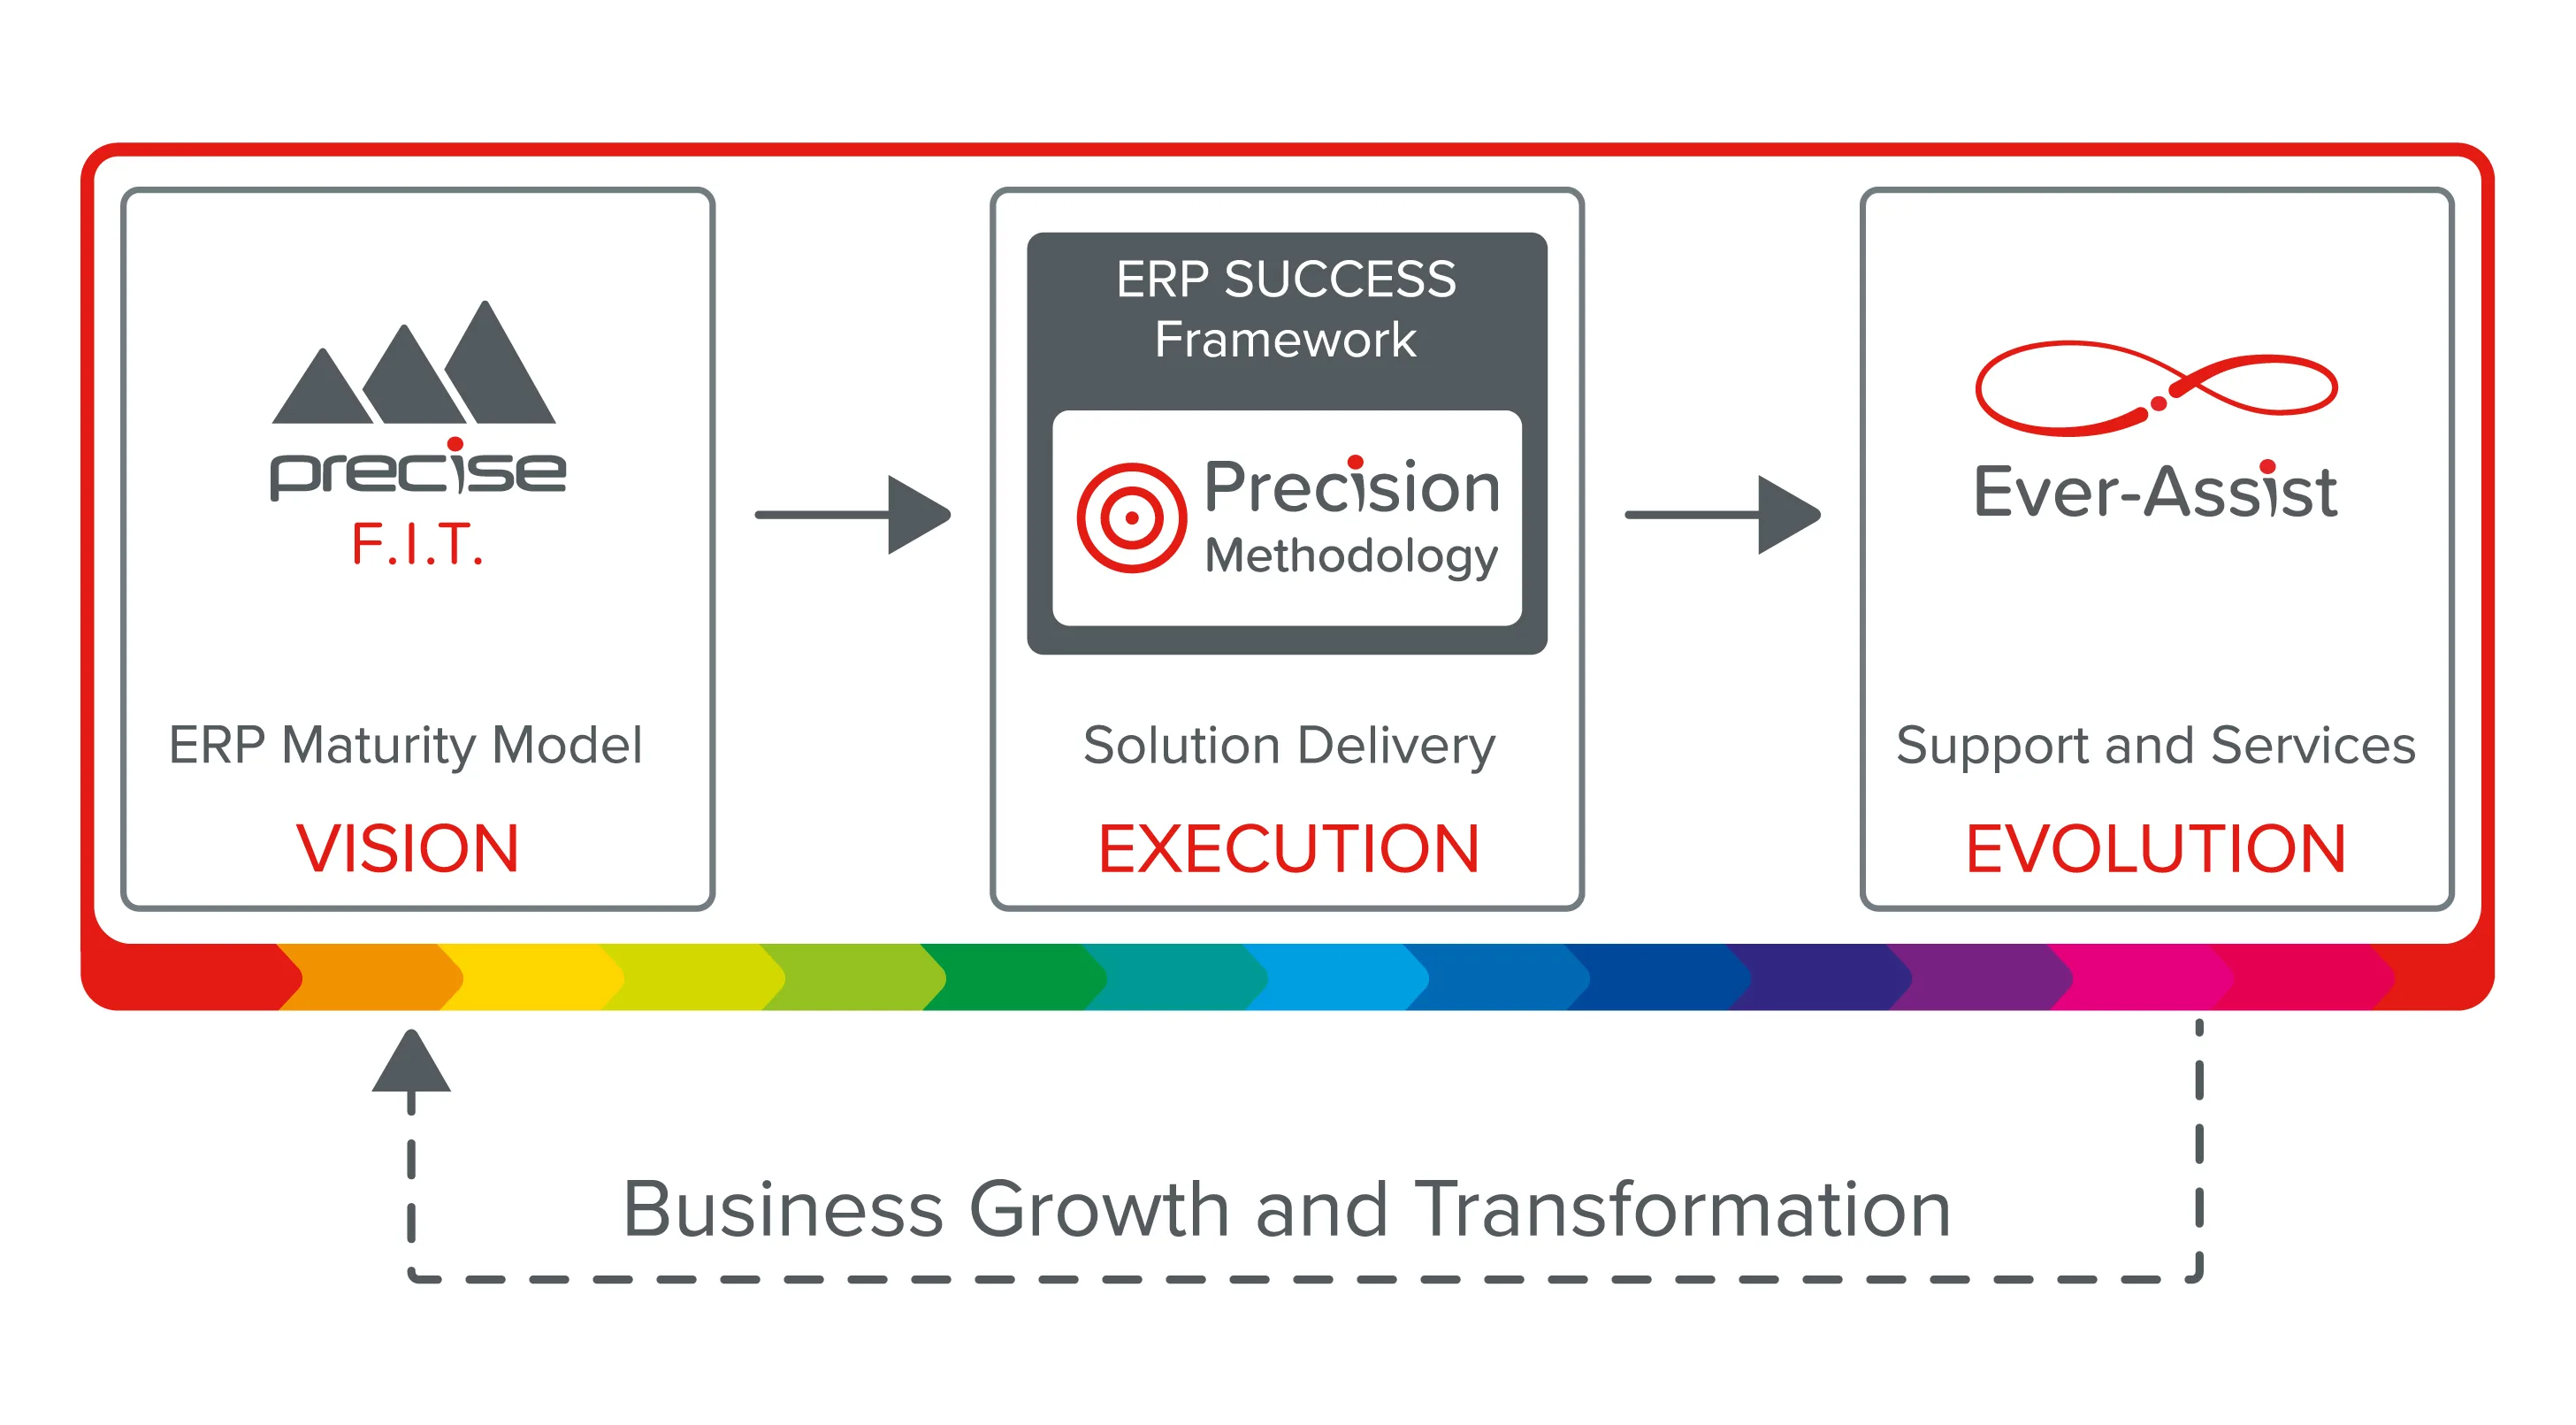 Graphic showing the various stages of the ERP journey, wrapped up in business transformation with a dotted line leading back to the first stage which is the Precise F.I.T model